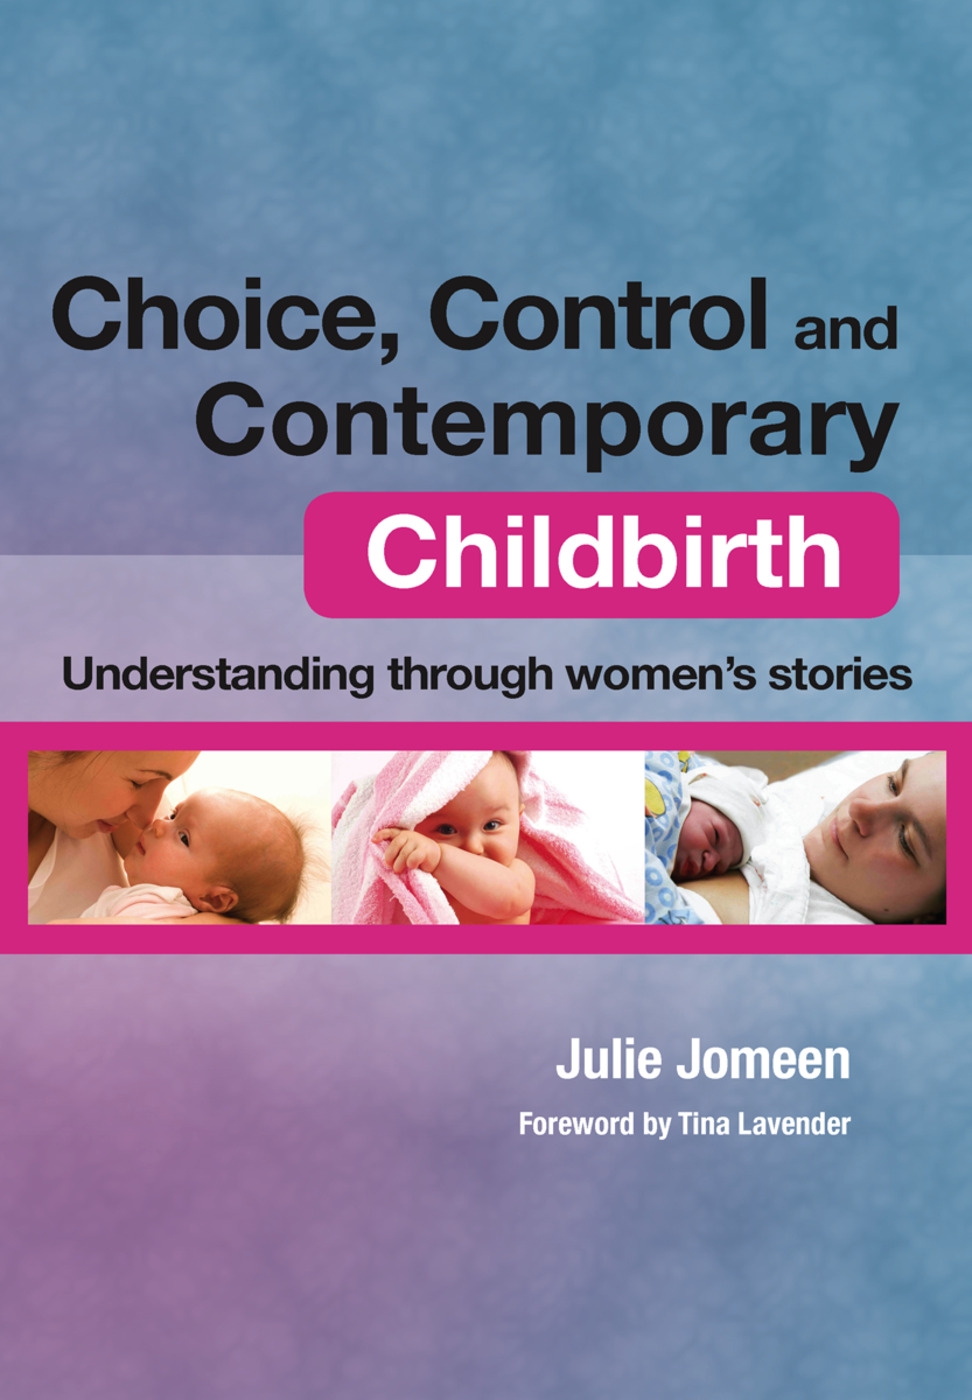 Choice, Control and Contemporary Childbirth: Understanding Through Women’s Stories